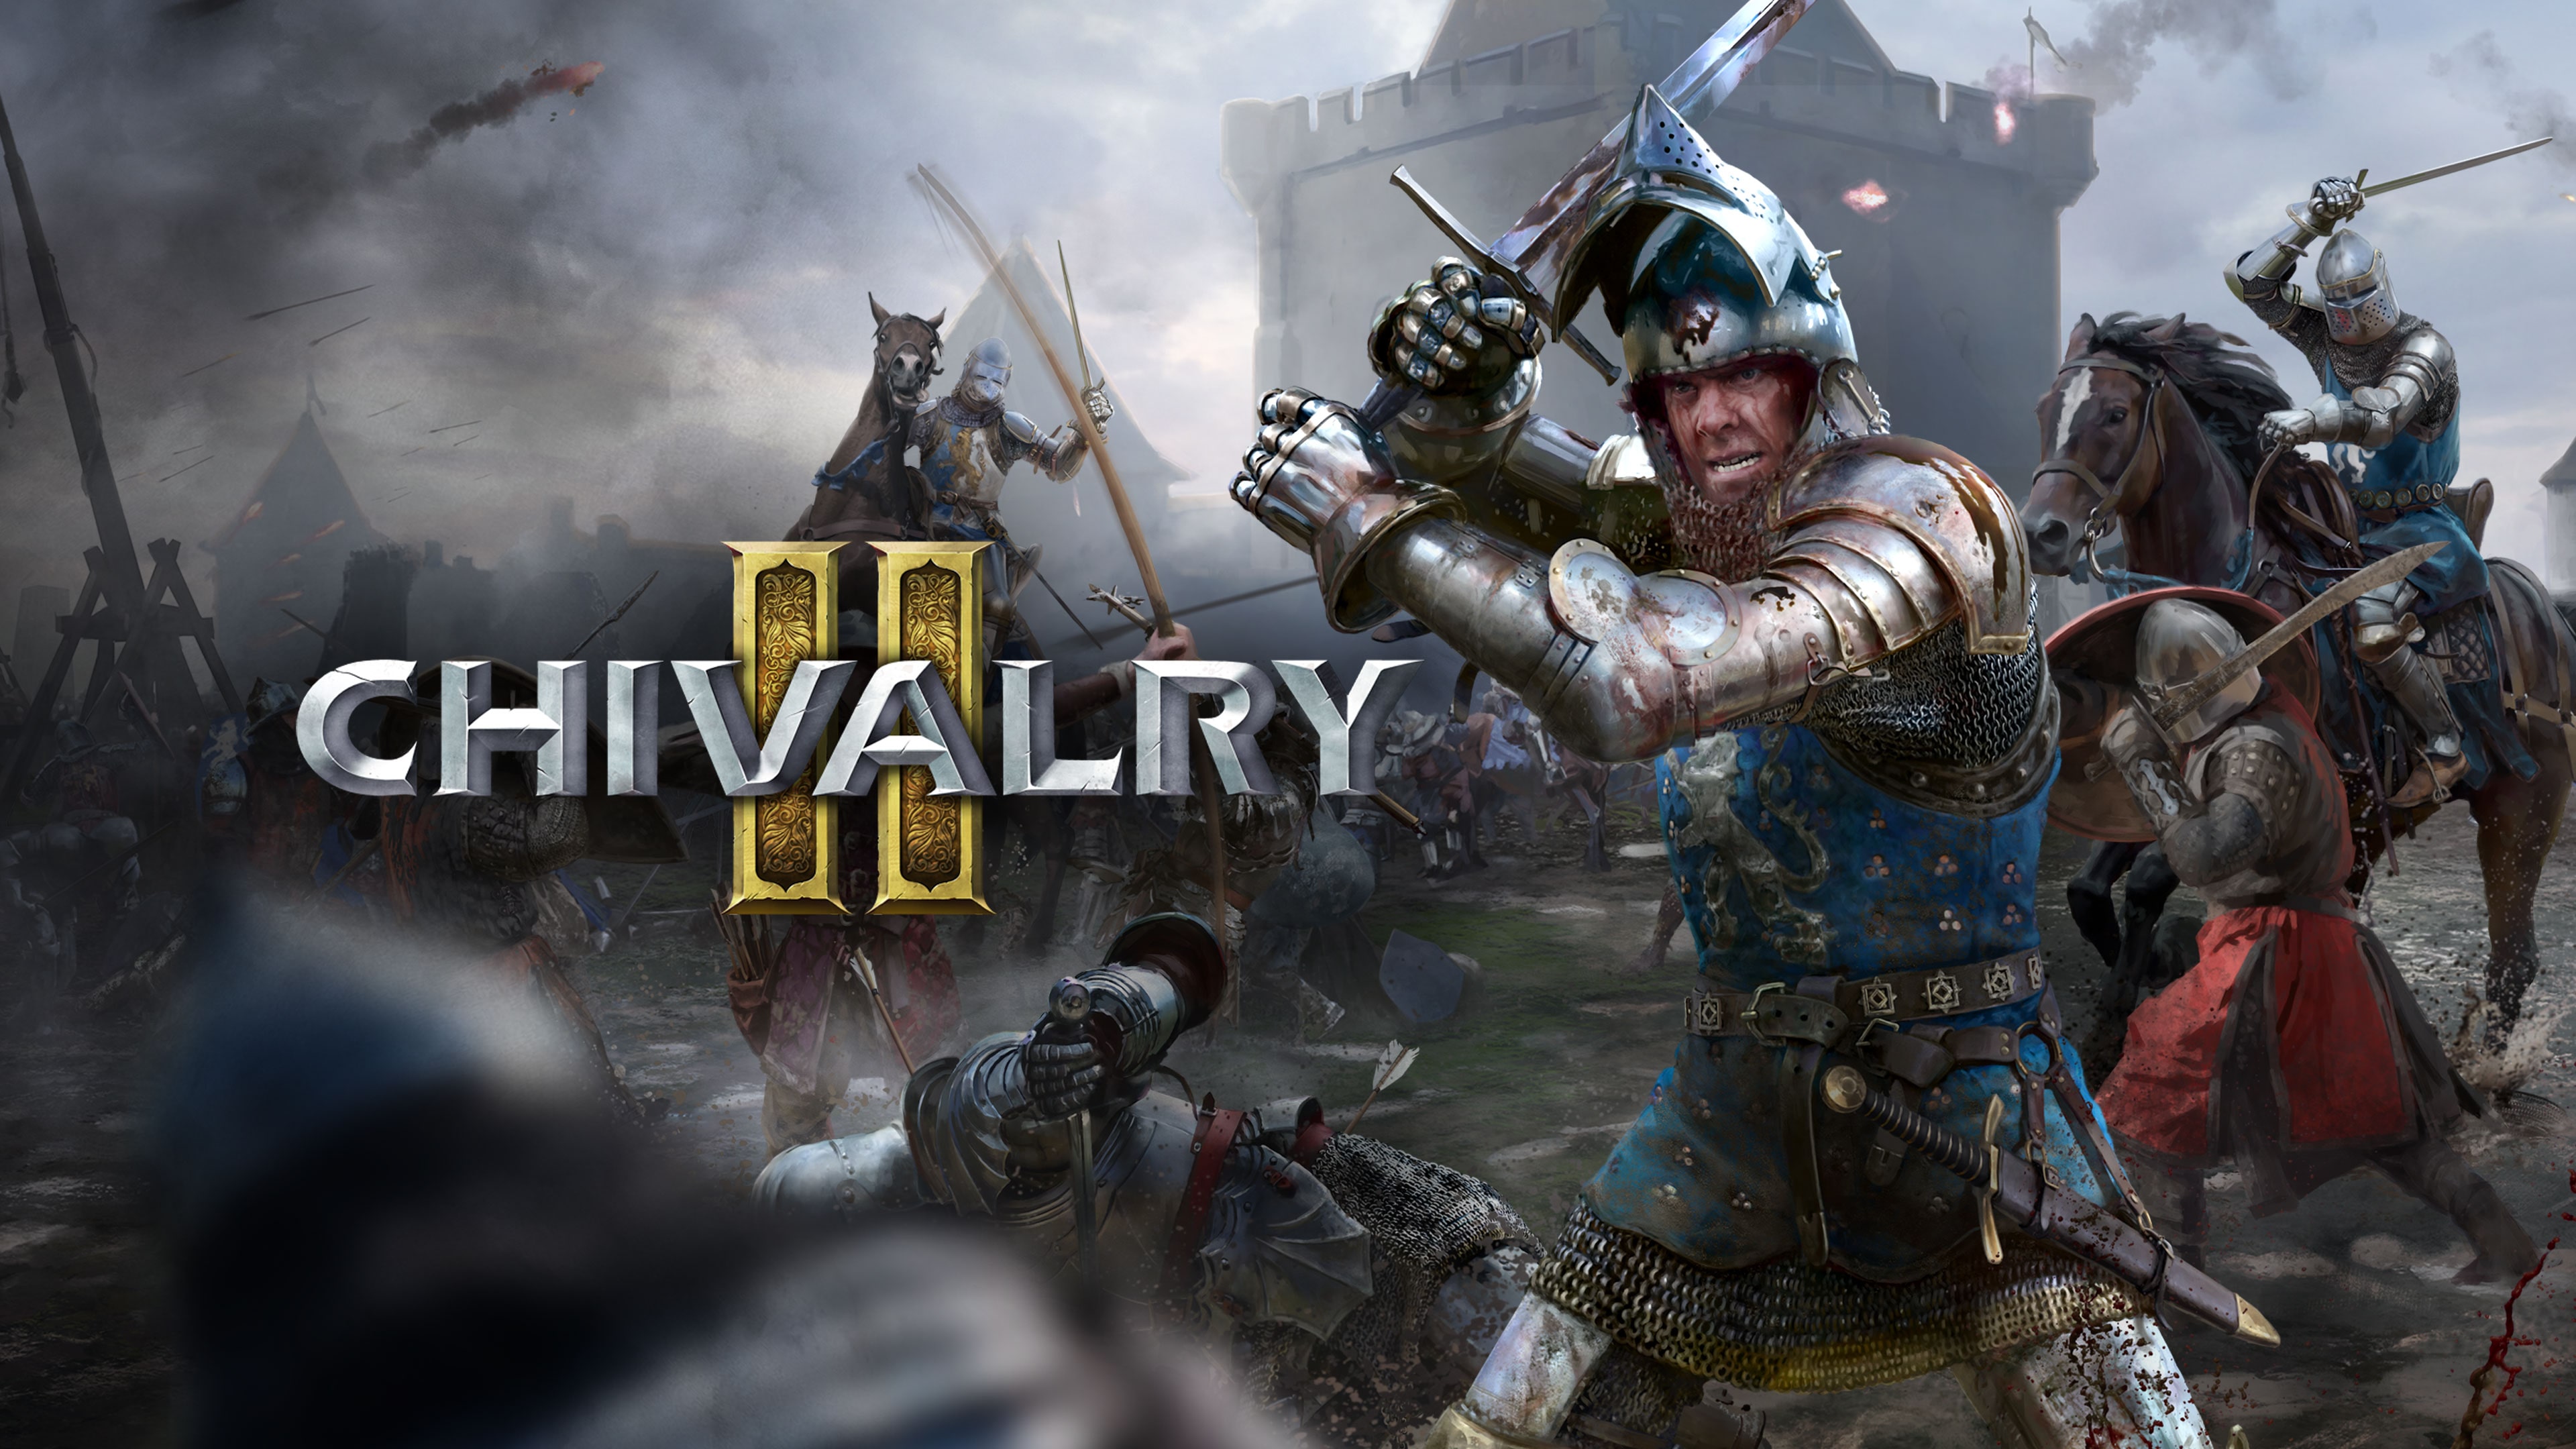 free download chivalry 2 ps5